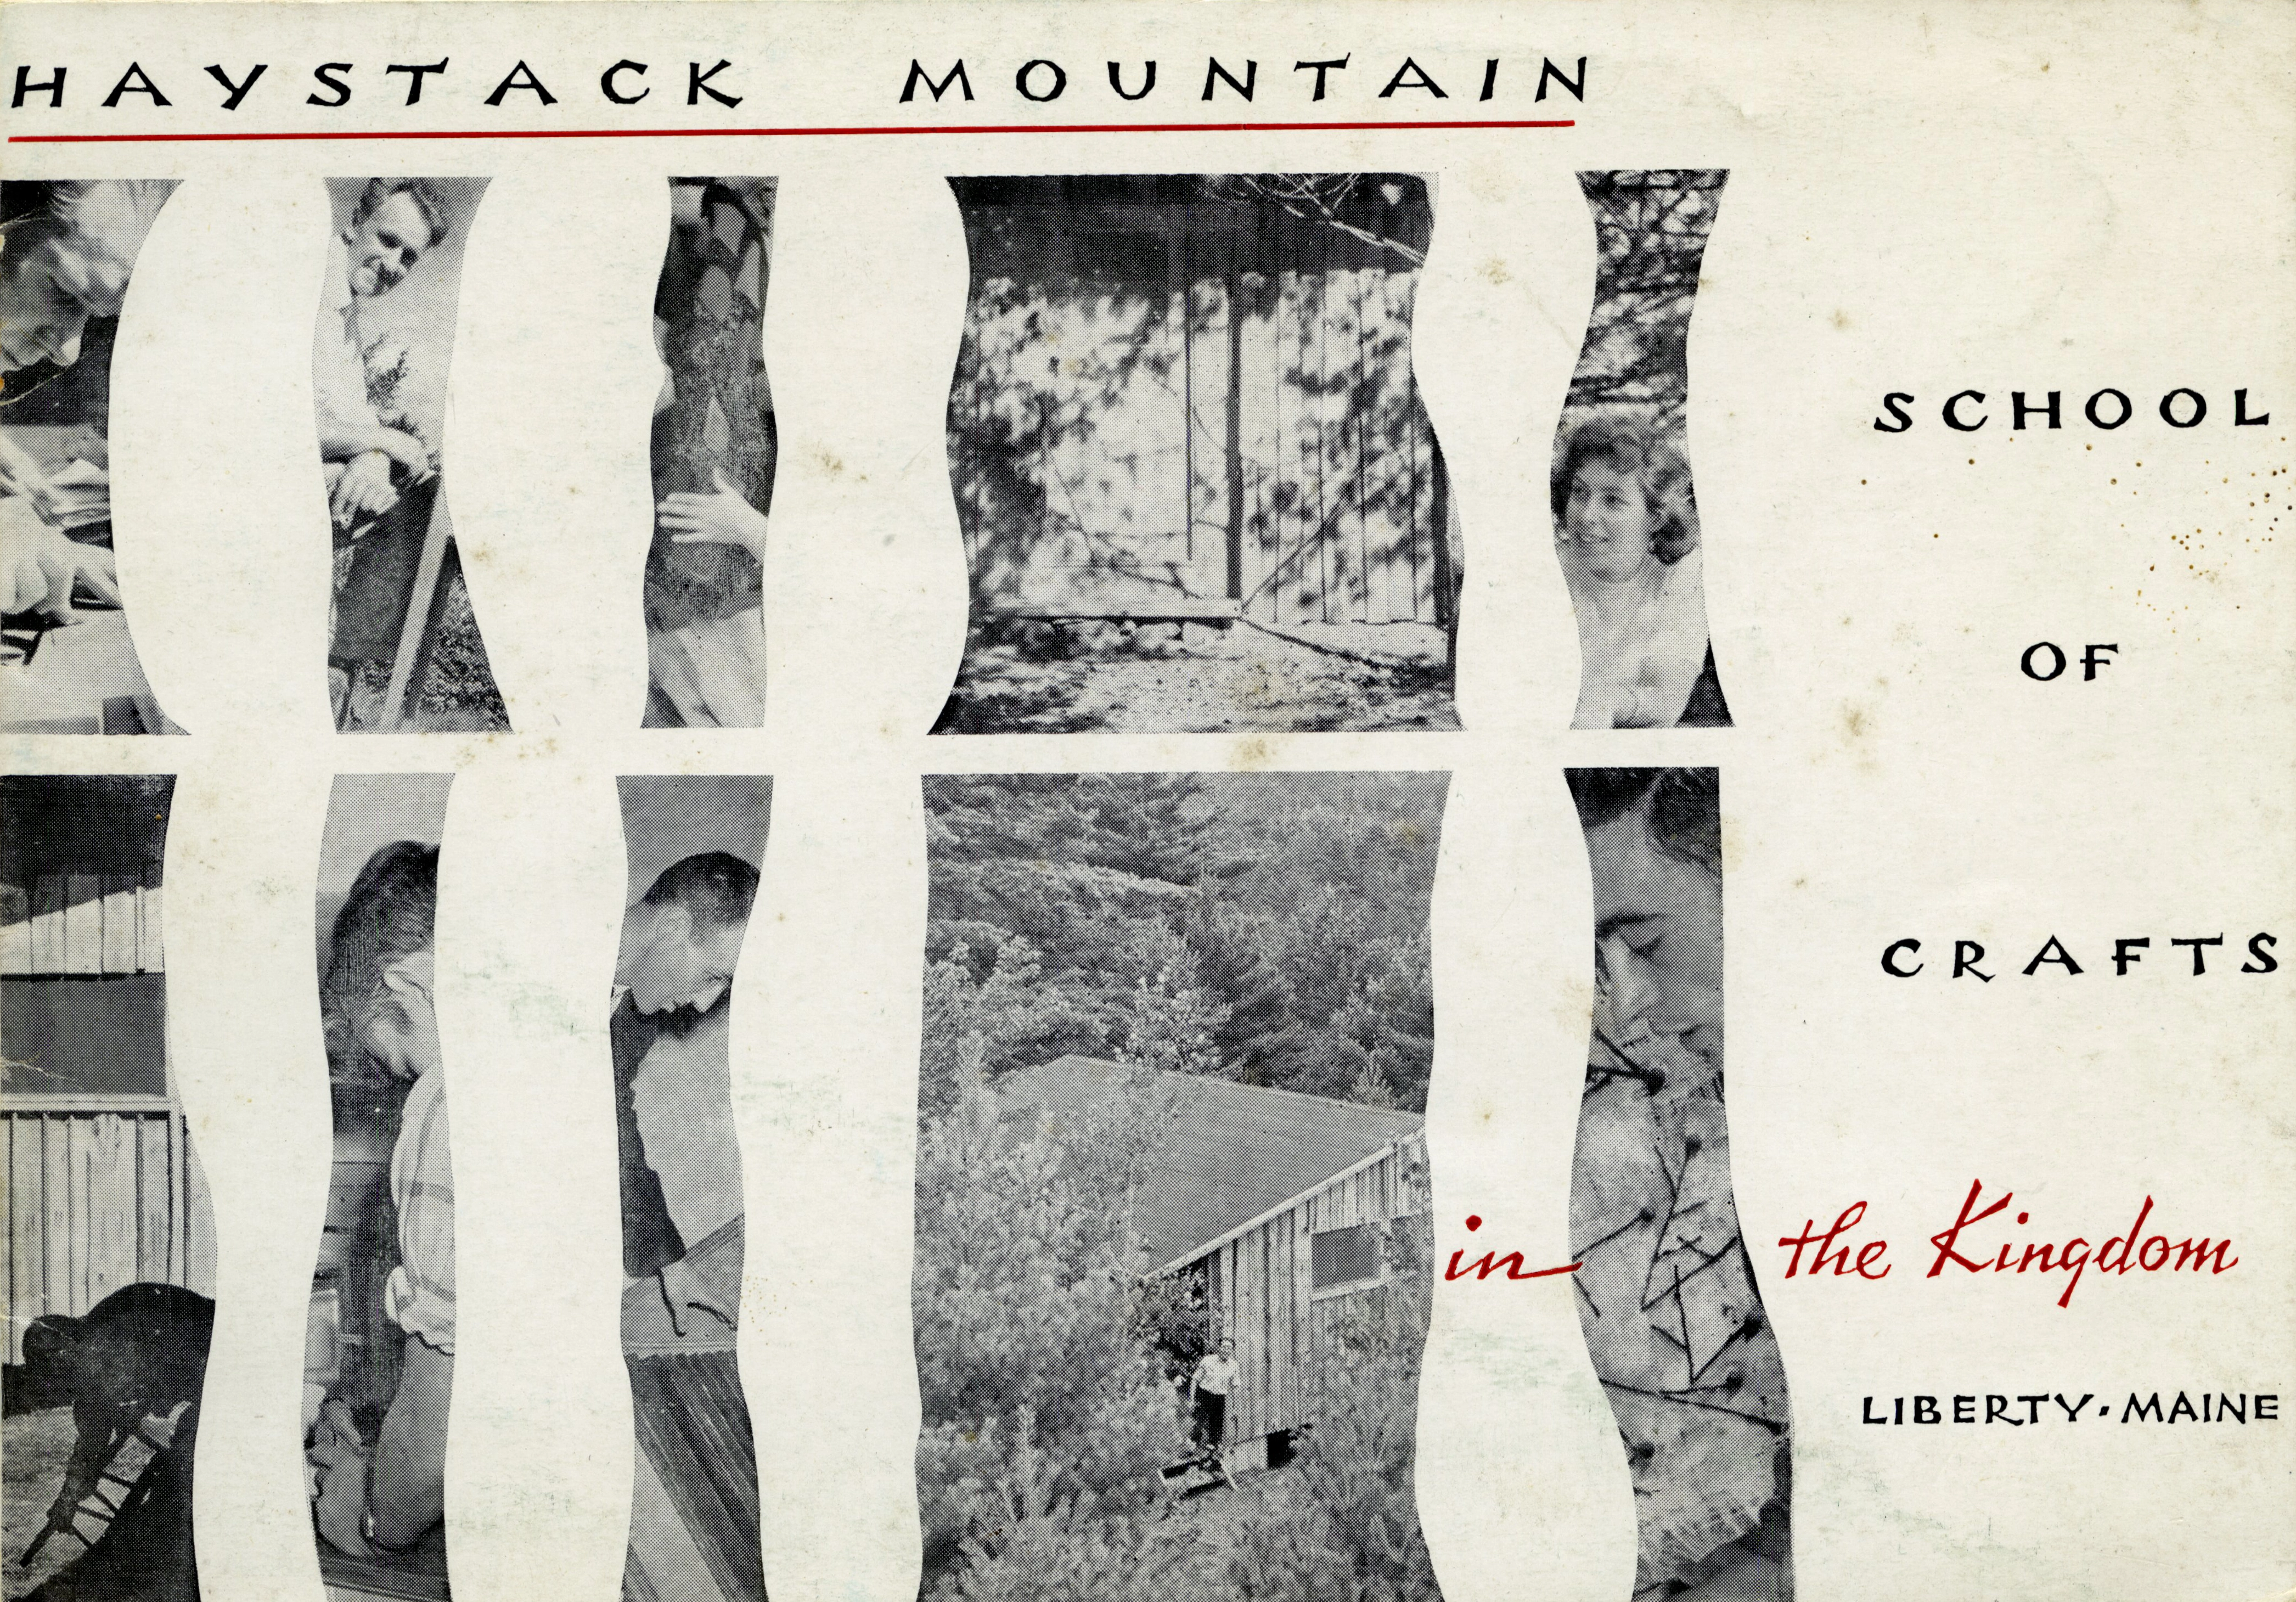 The cover of a pamphlet for Haystack Mountain School of Crafts in liberty, Maine. The pamphlet is white, layered with slivers of black and white photographs depicting students working on projects at the school.